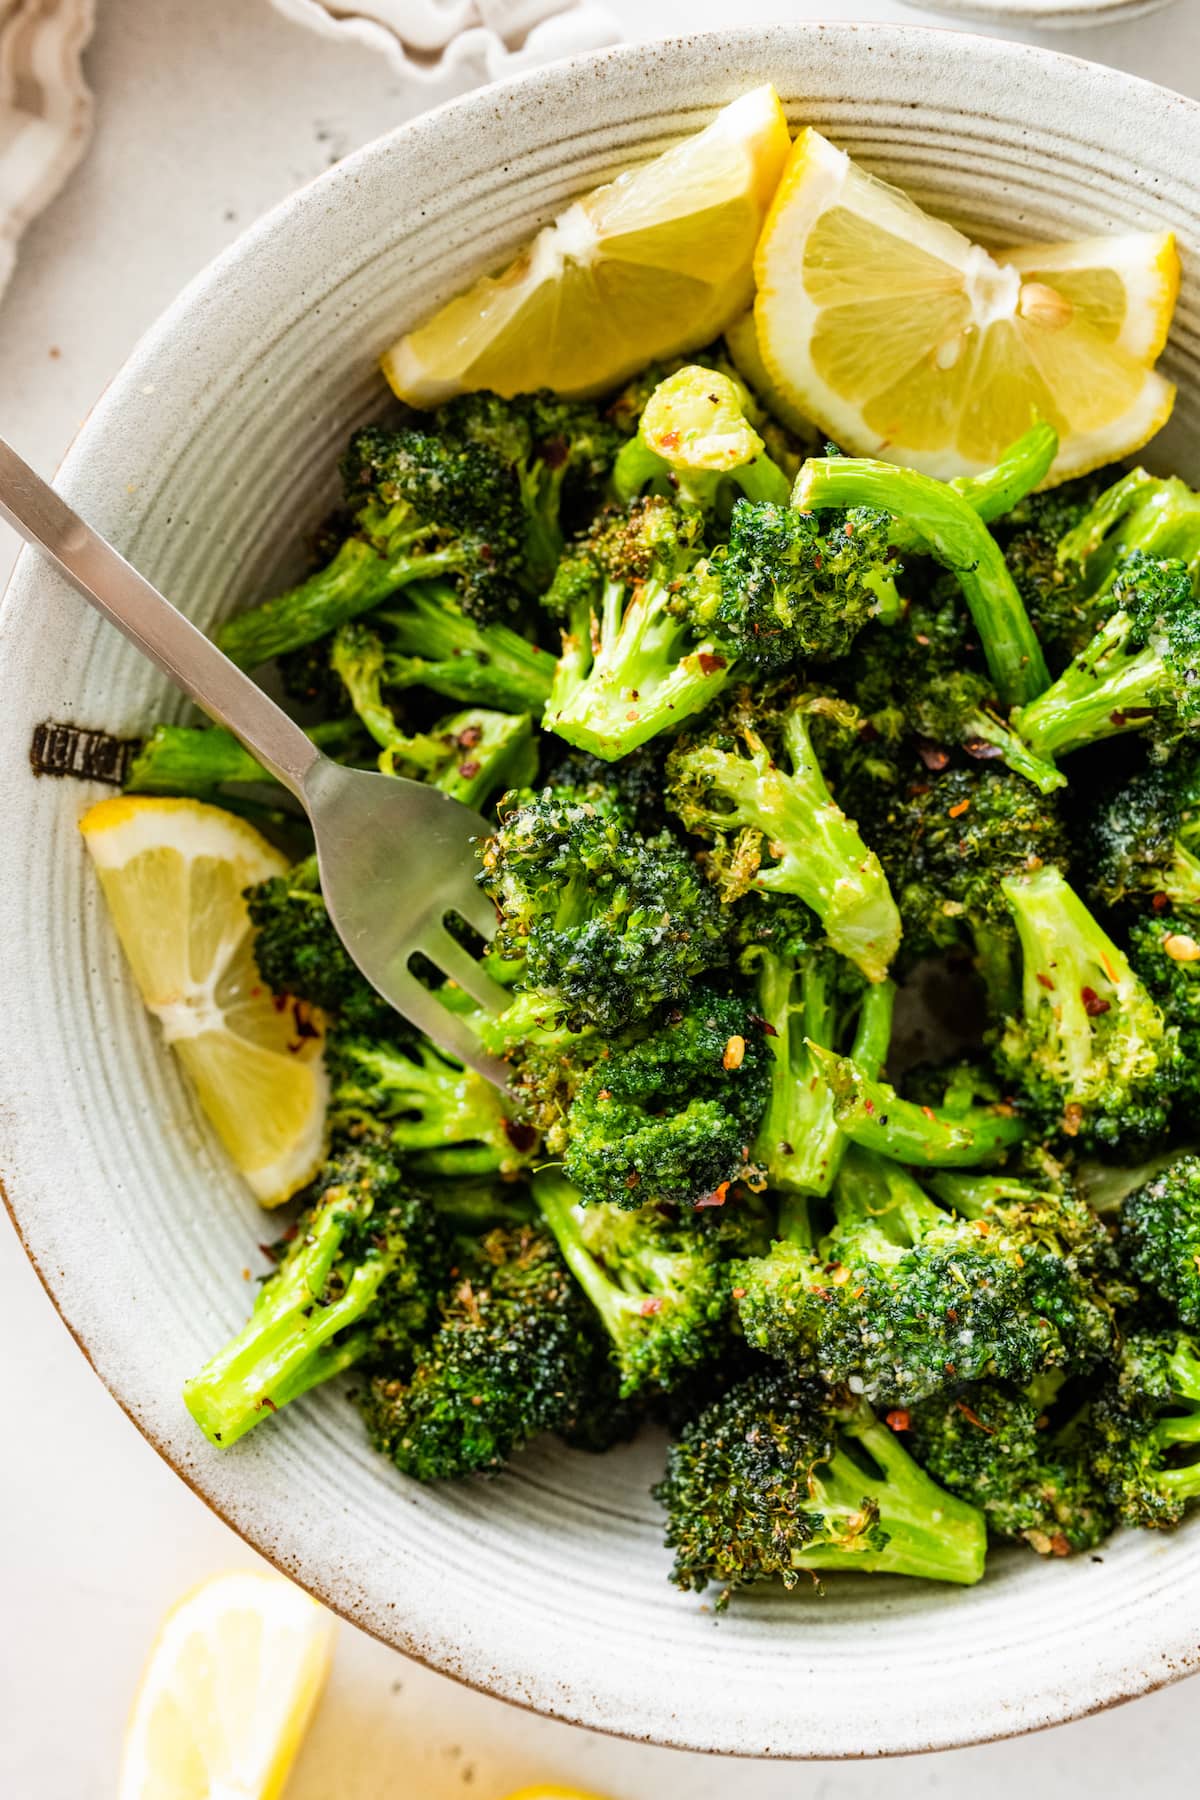 Seasoned air-fried broccoli in a large bowl with lemon wedges.